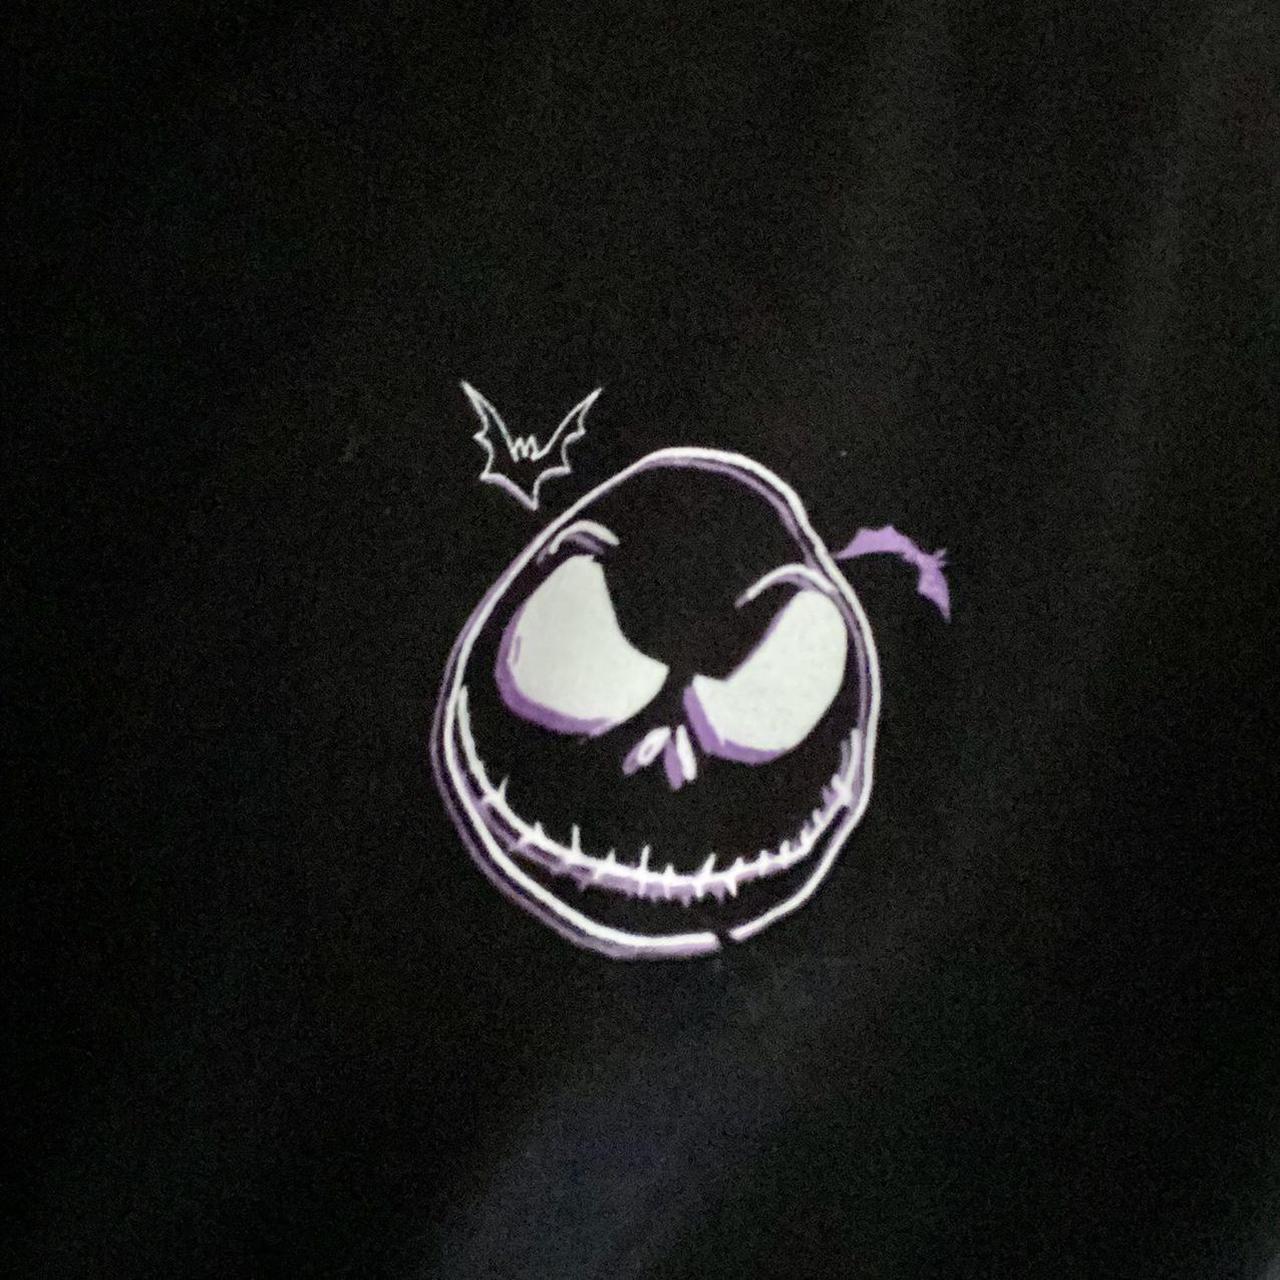 Product Image 3 - Nightmare Before Christmas Sweater

[CONDITION]
Like new!